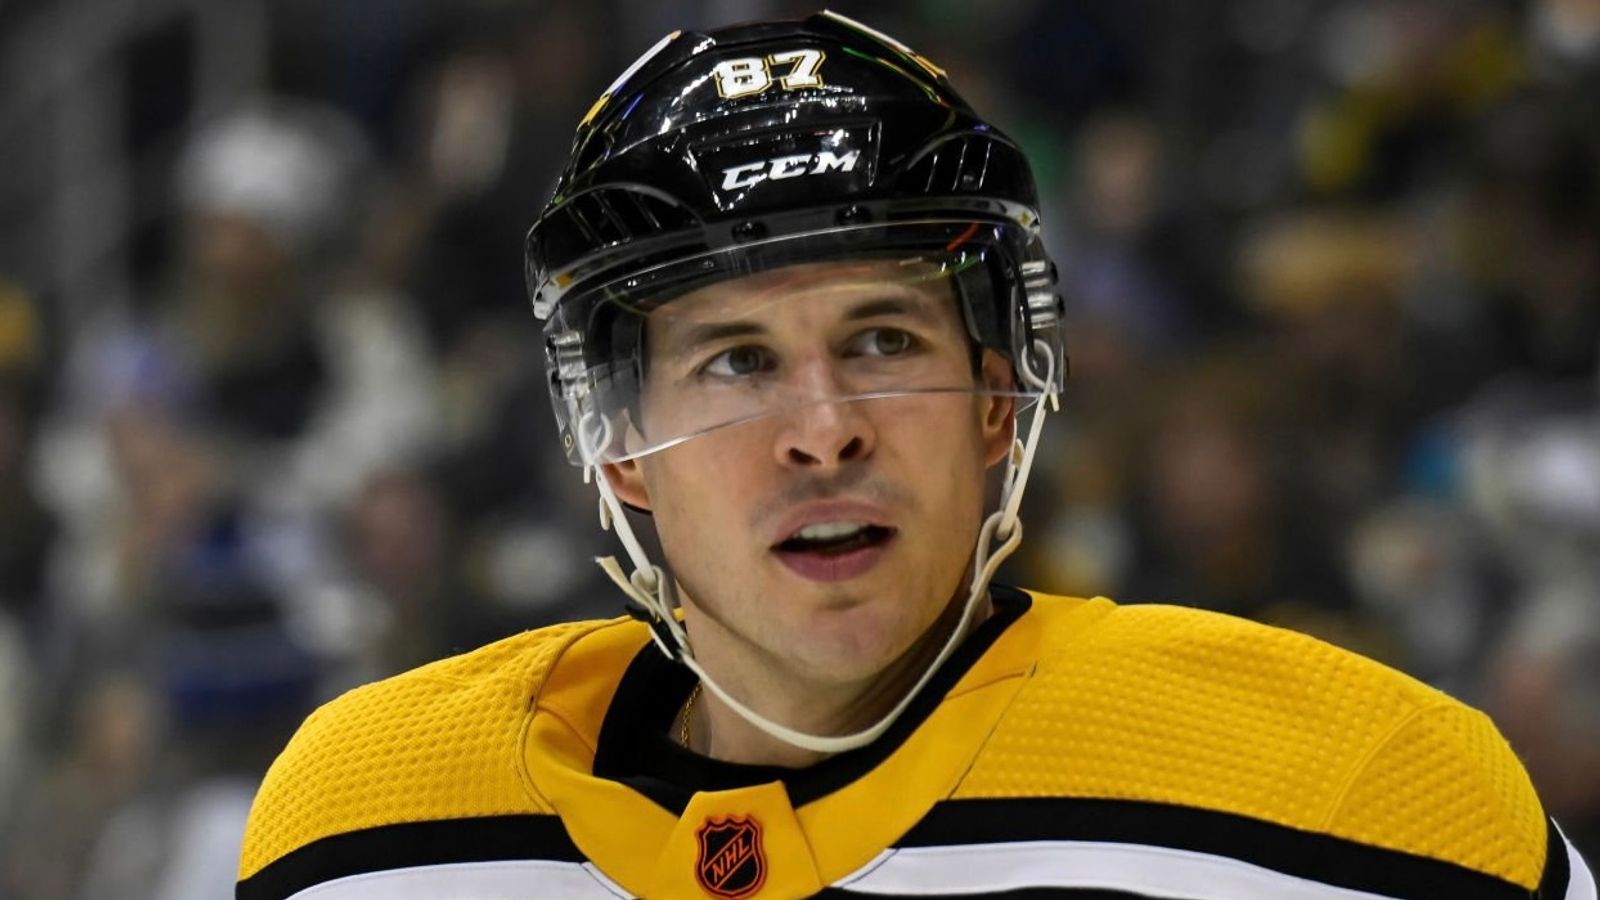 UPDATED) Crosby Selected for NHL All-Star Game